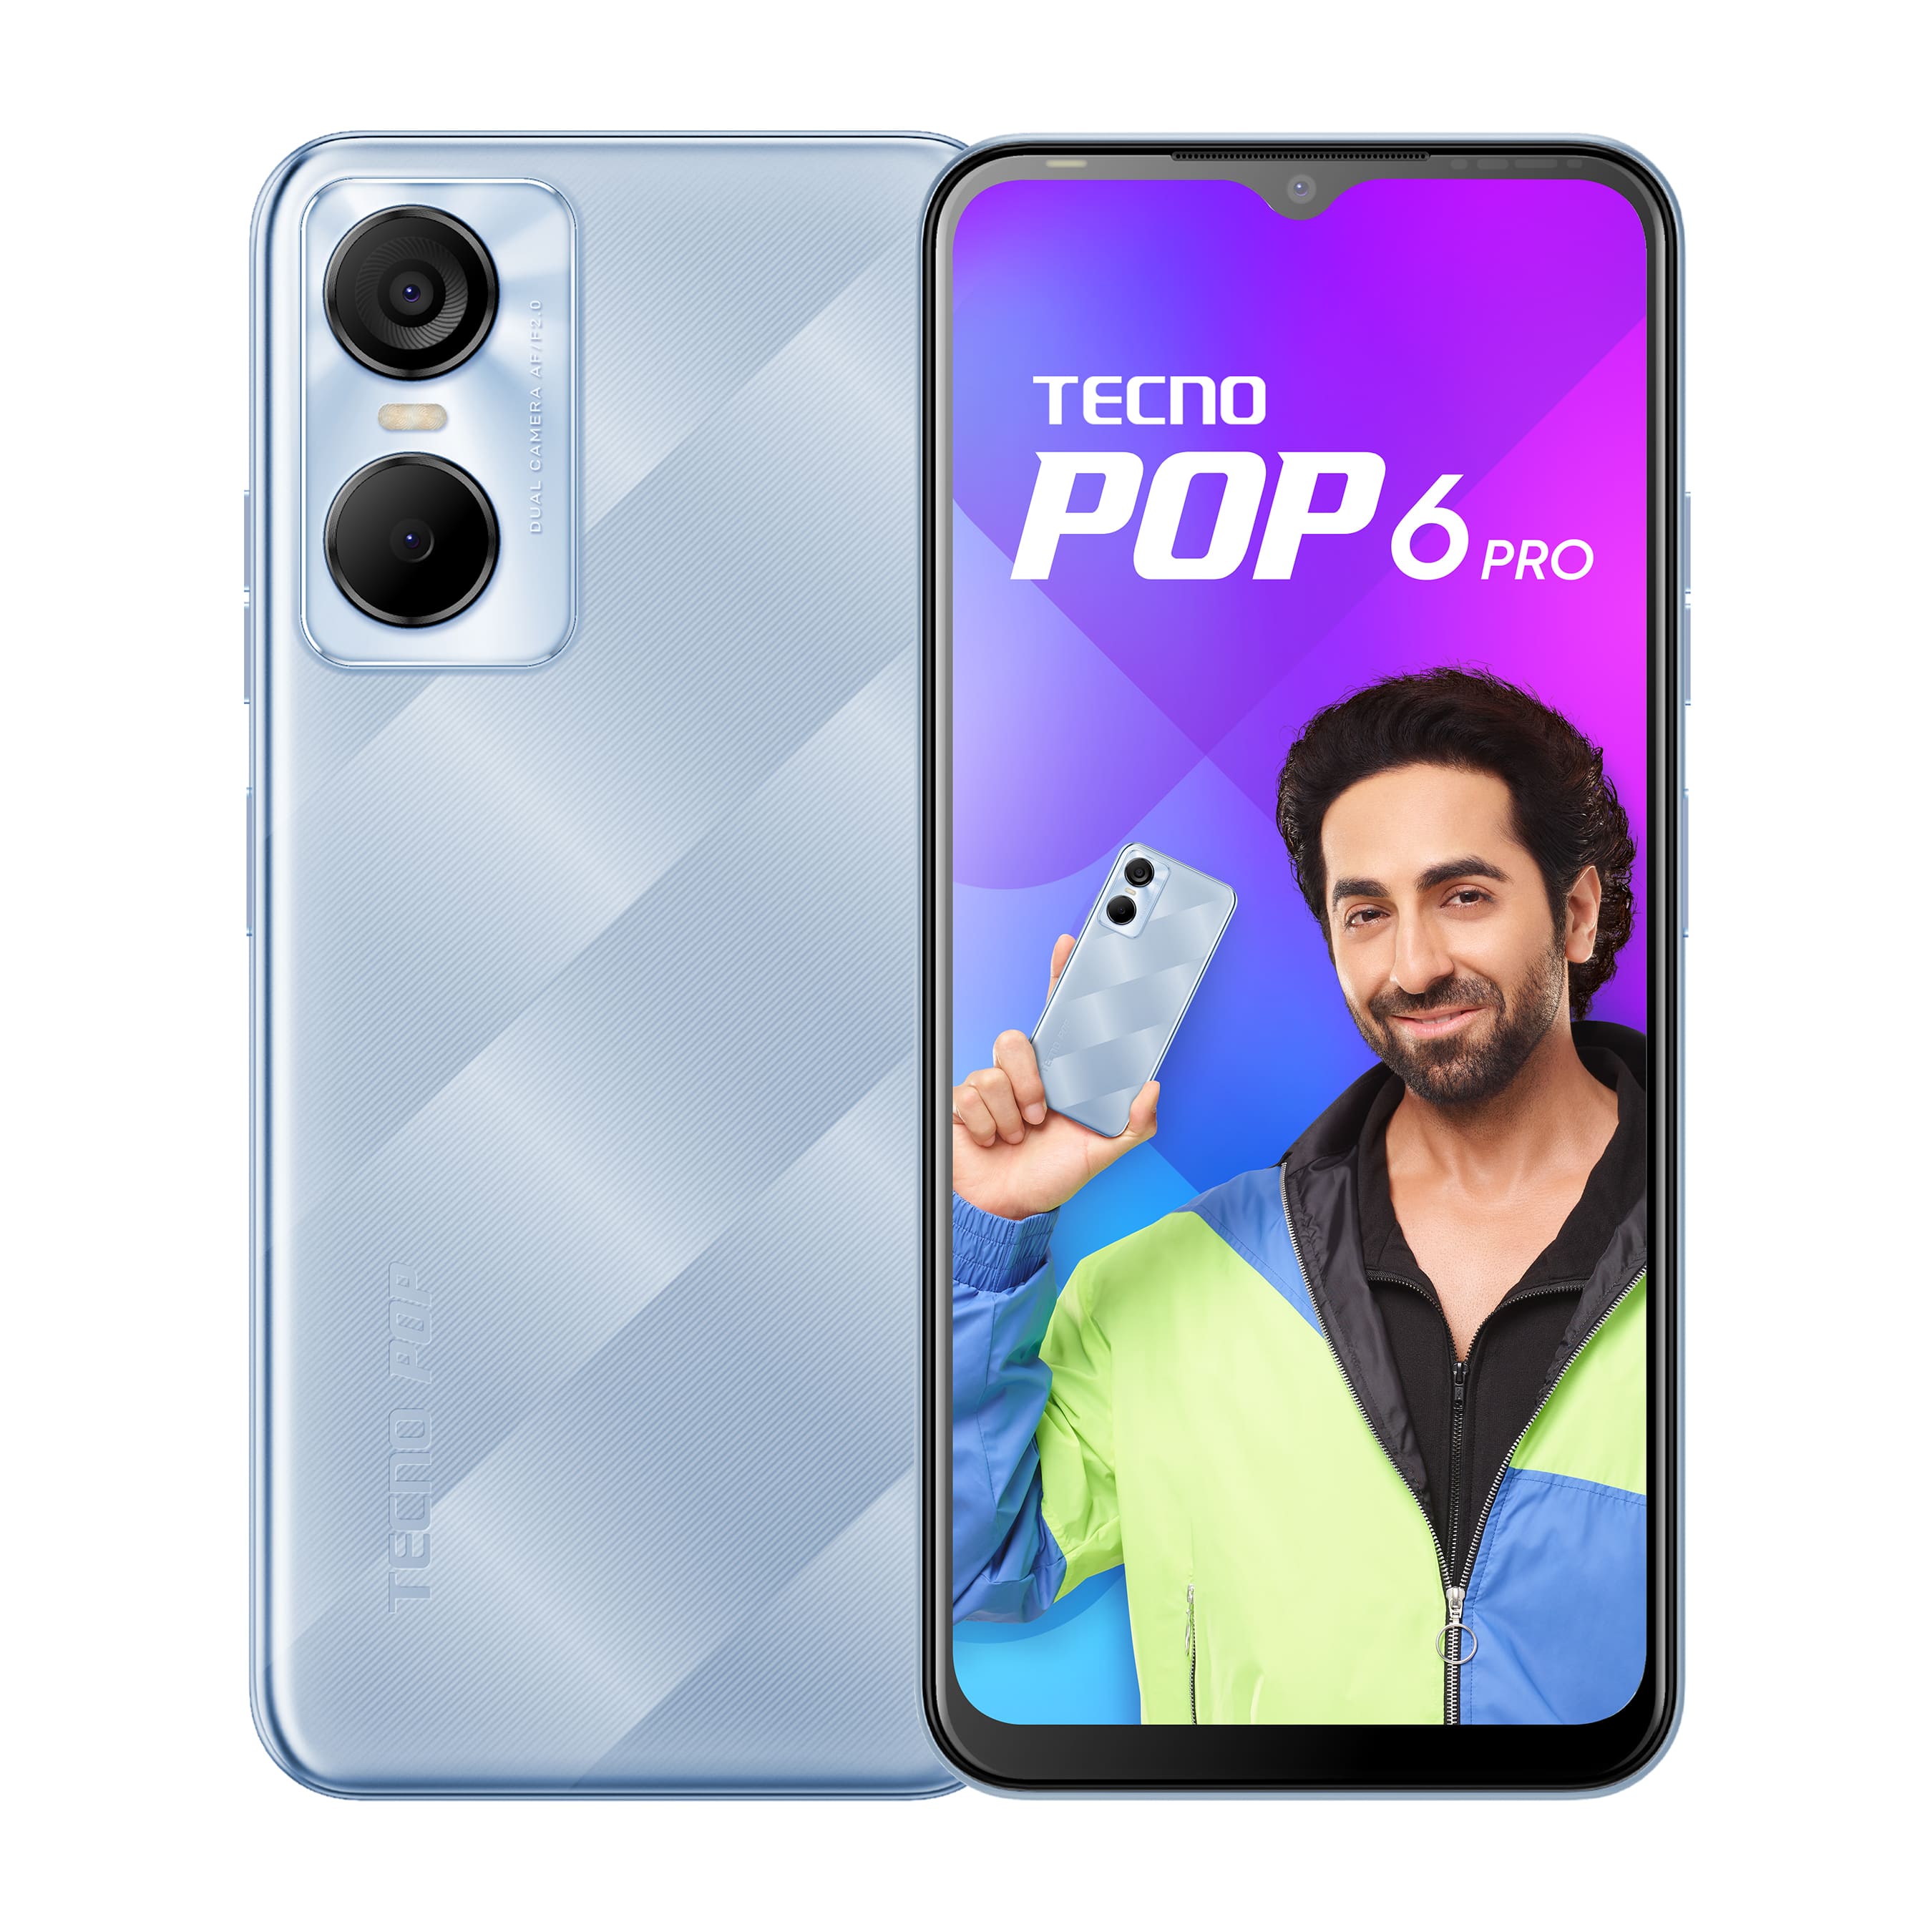 TECNO POP 6 Pro with 5000mAh battery goes on sale today at the price of INR 6,099 during the ongoing Amazon Great Indian Festival Sale